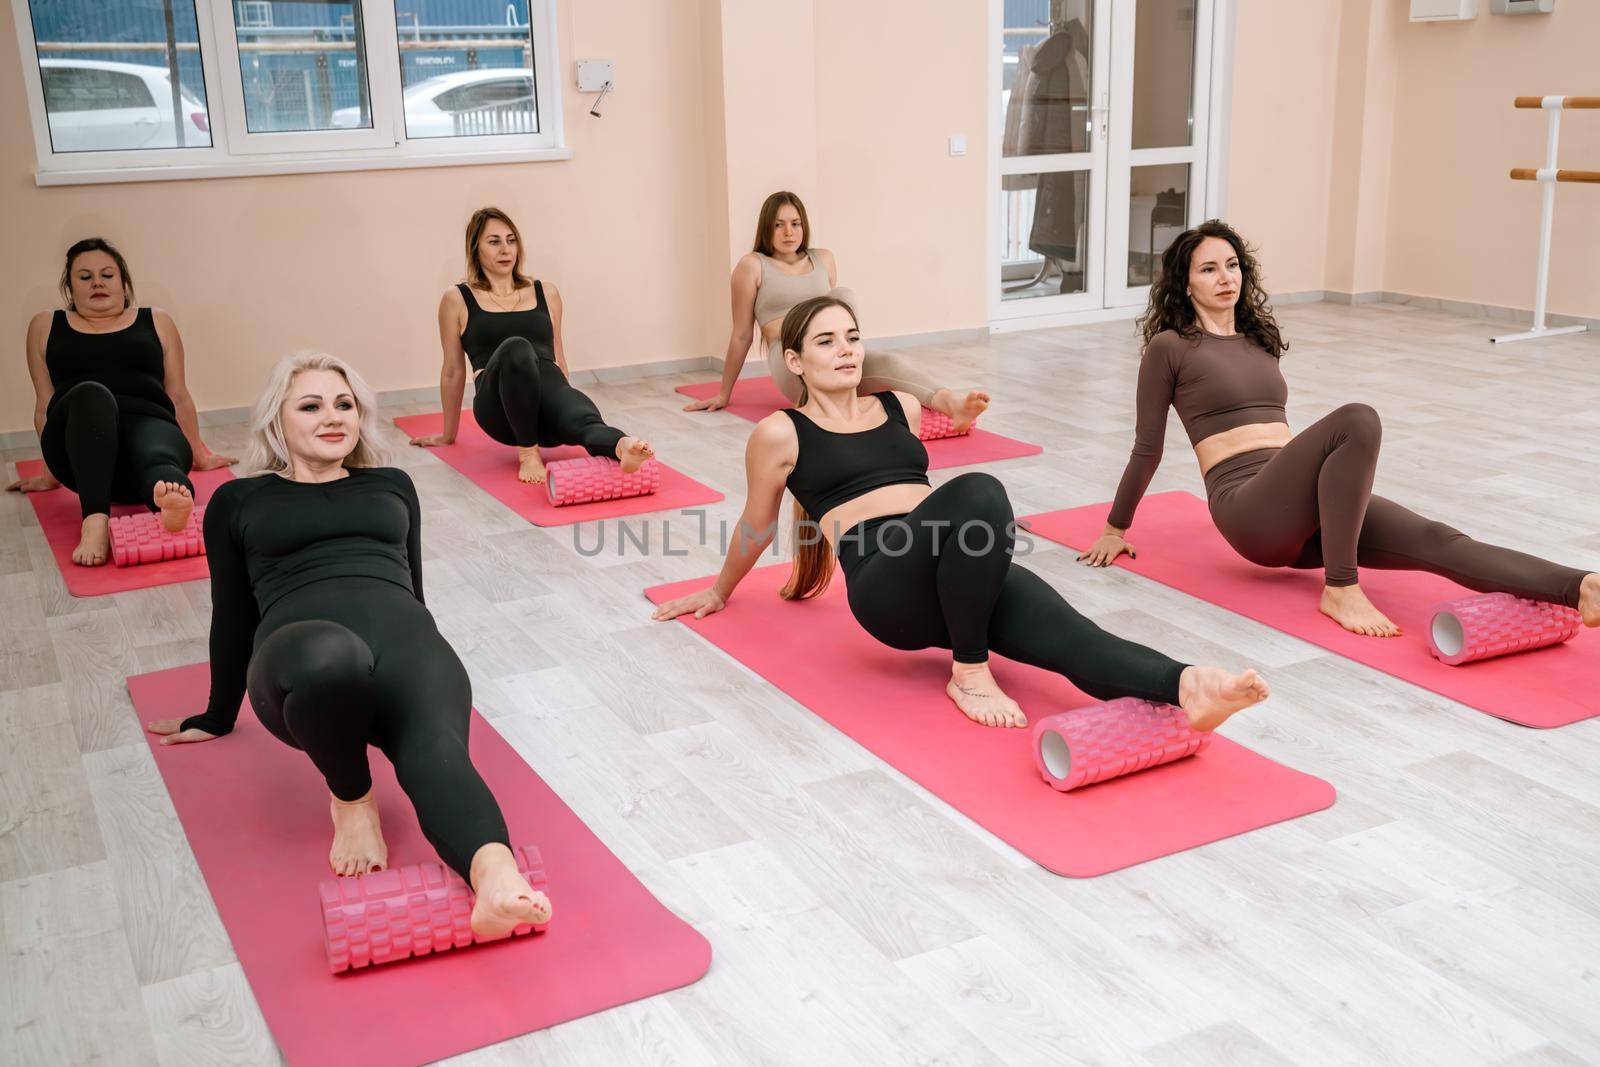 Athletic women doing fascia exercises on the floor with a foam roller massage tool to relieve back tension and relieve muscle pain. The concept of physiotherapy and stretching training.